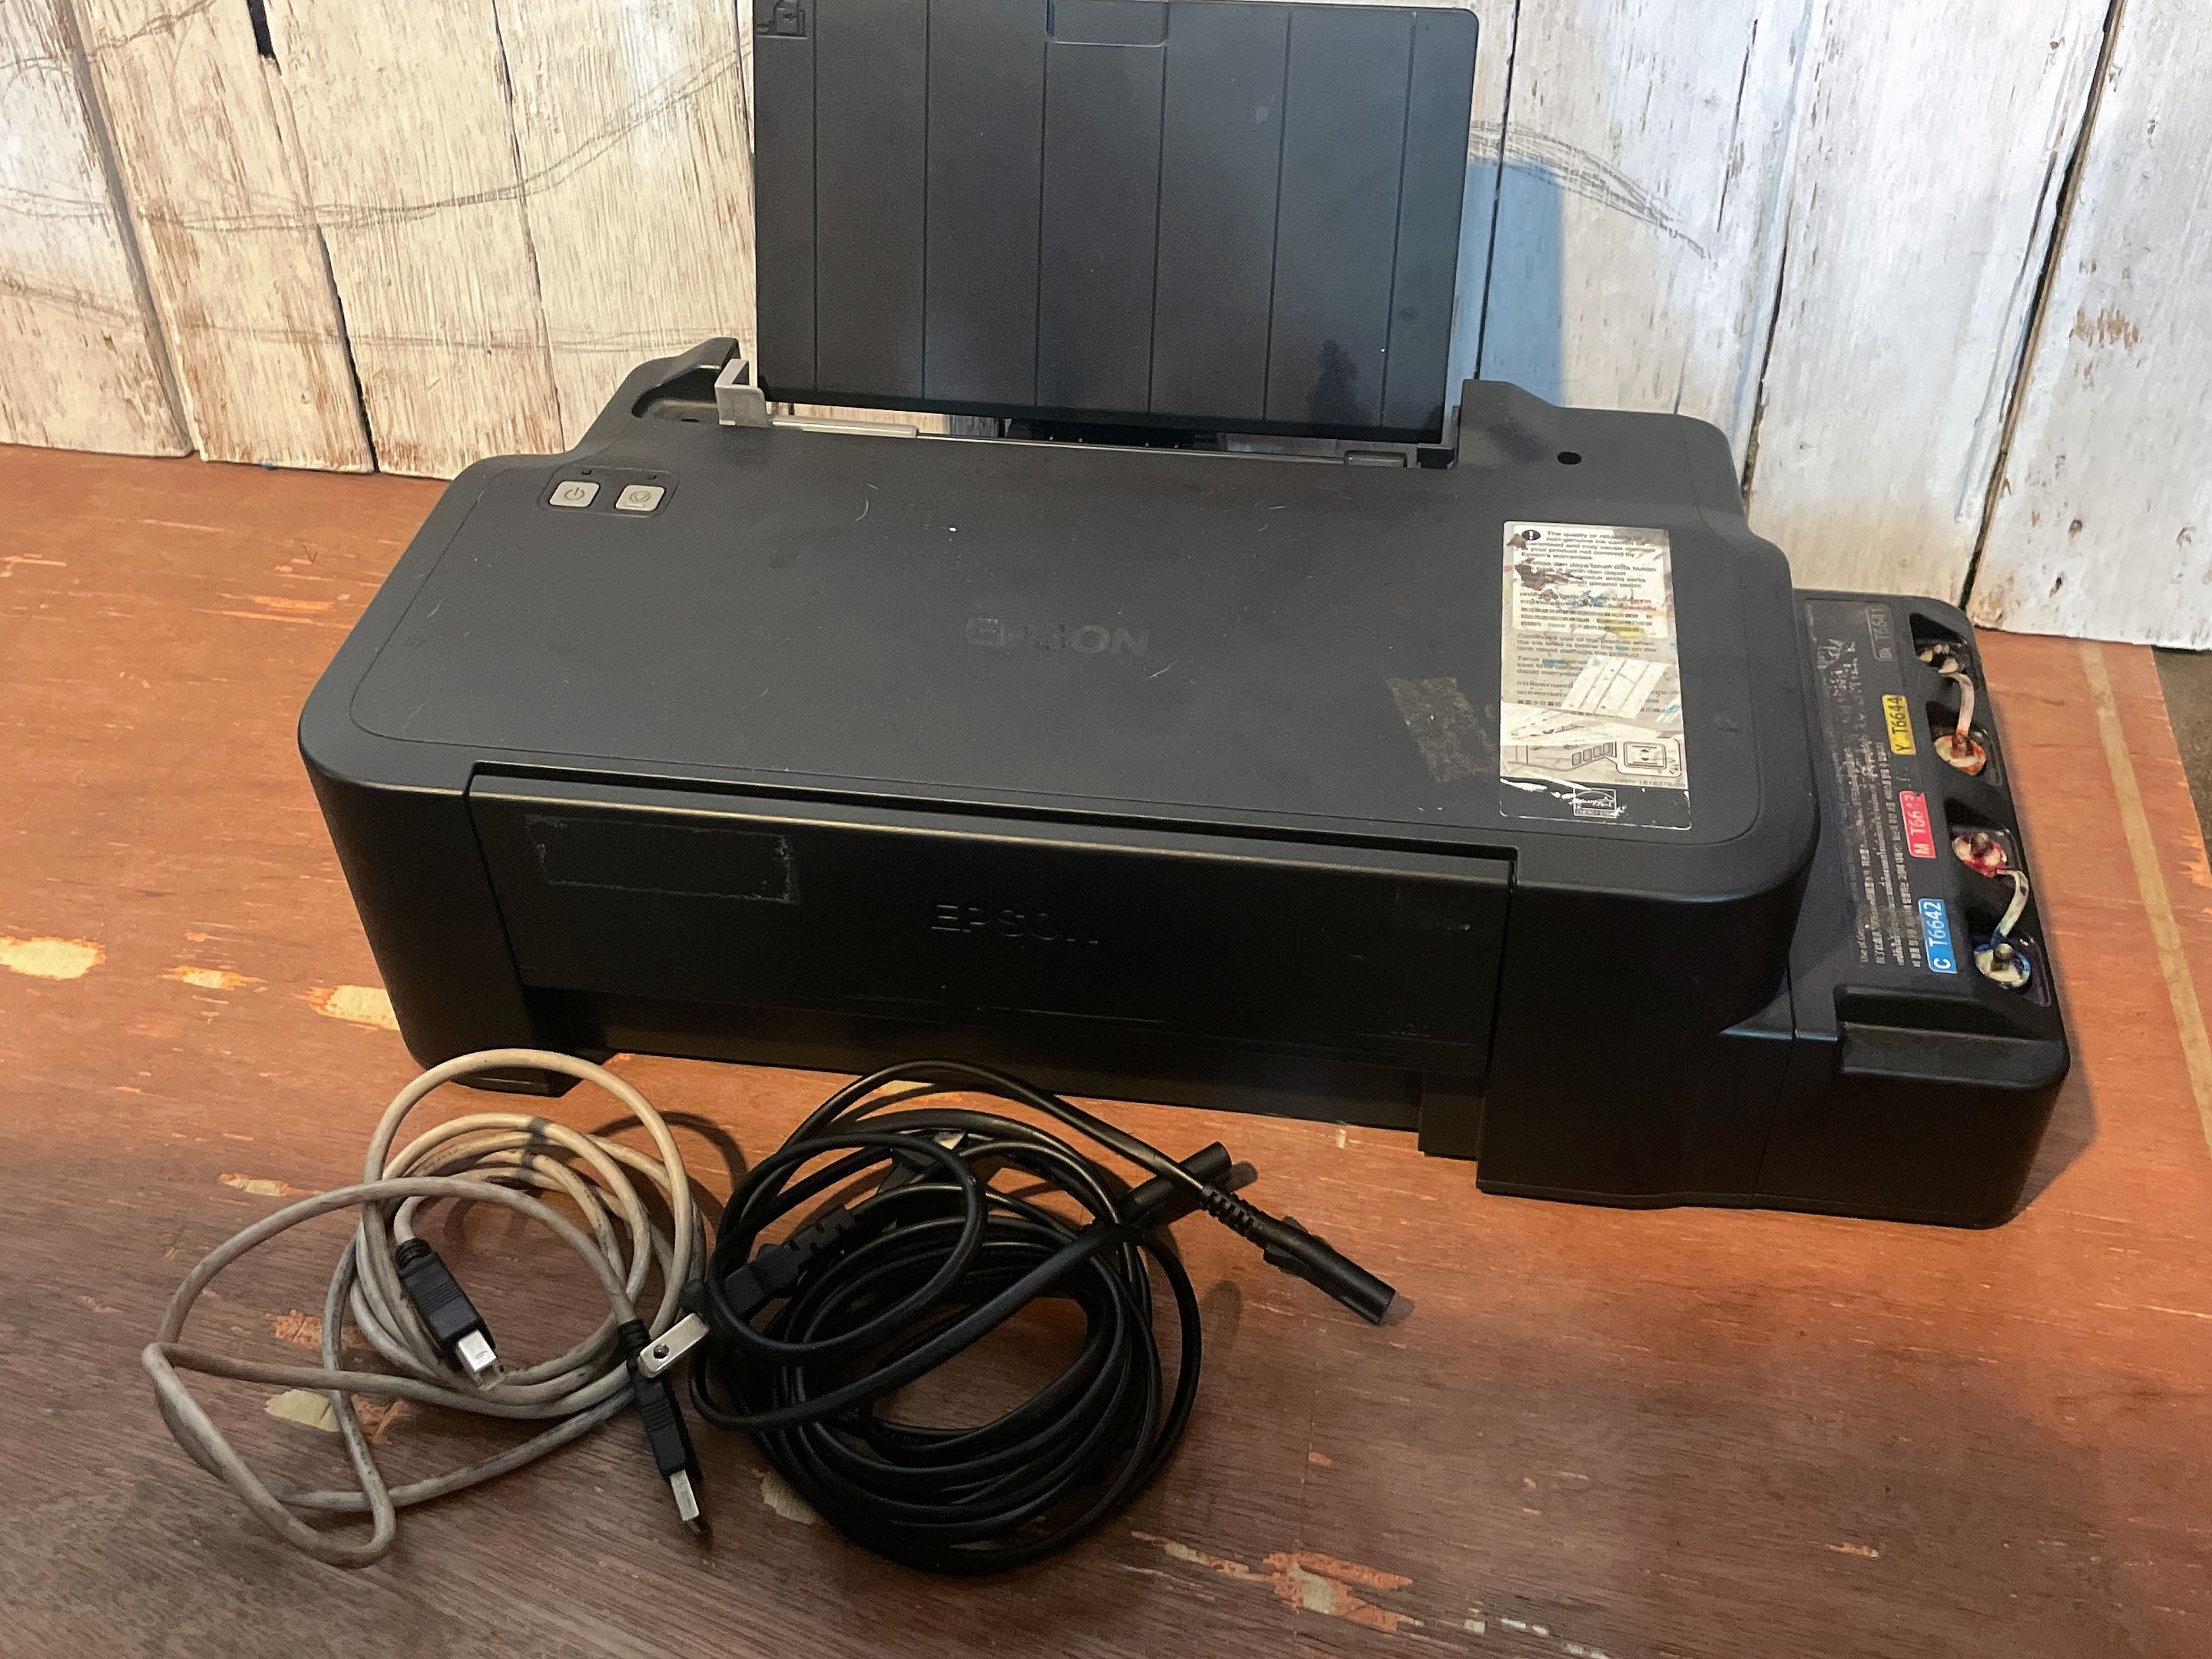 Epson L120 Computers And Tech Printers Scanners And Copiers On Carousell 5045